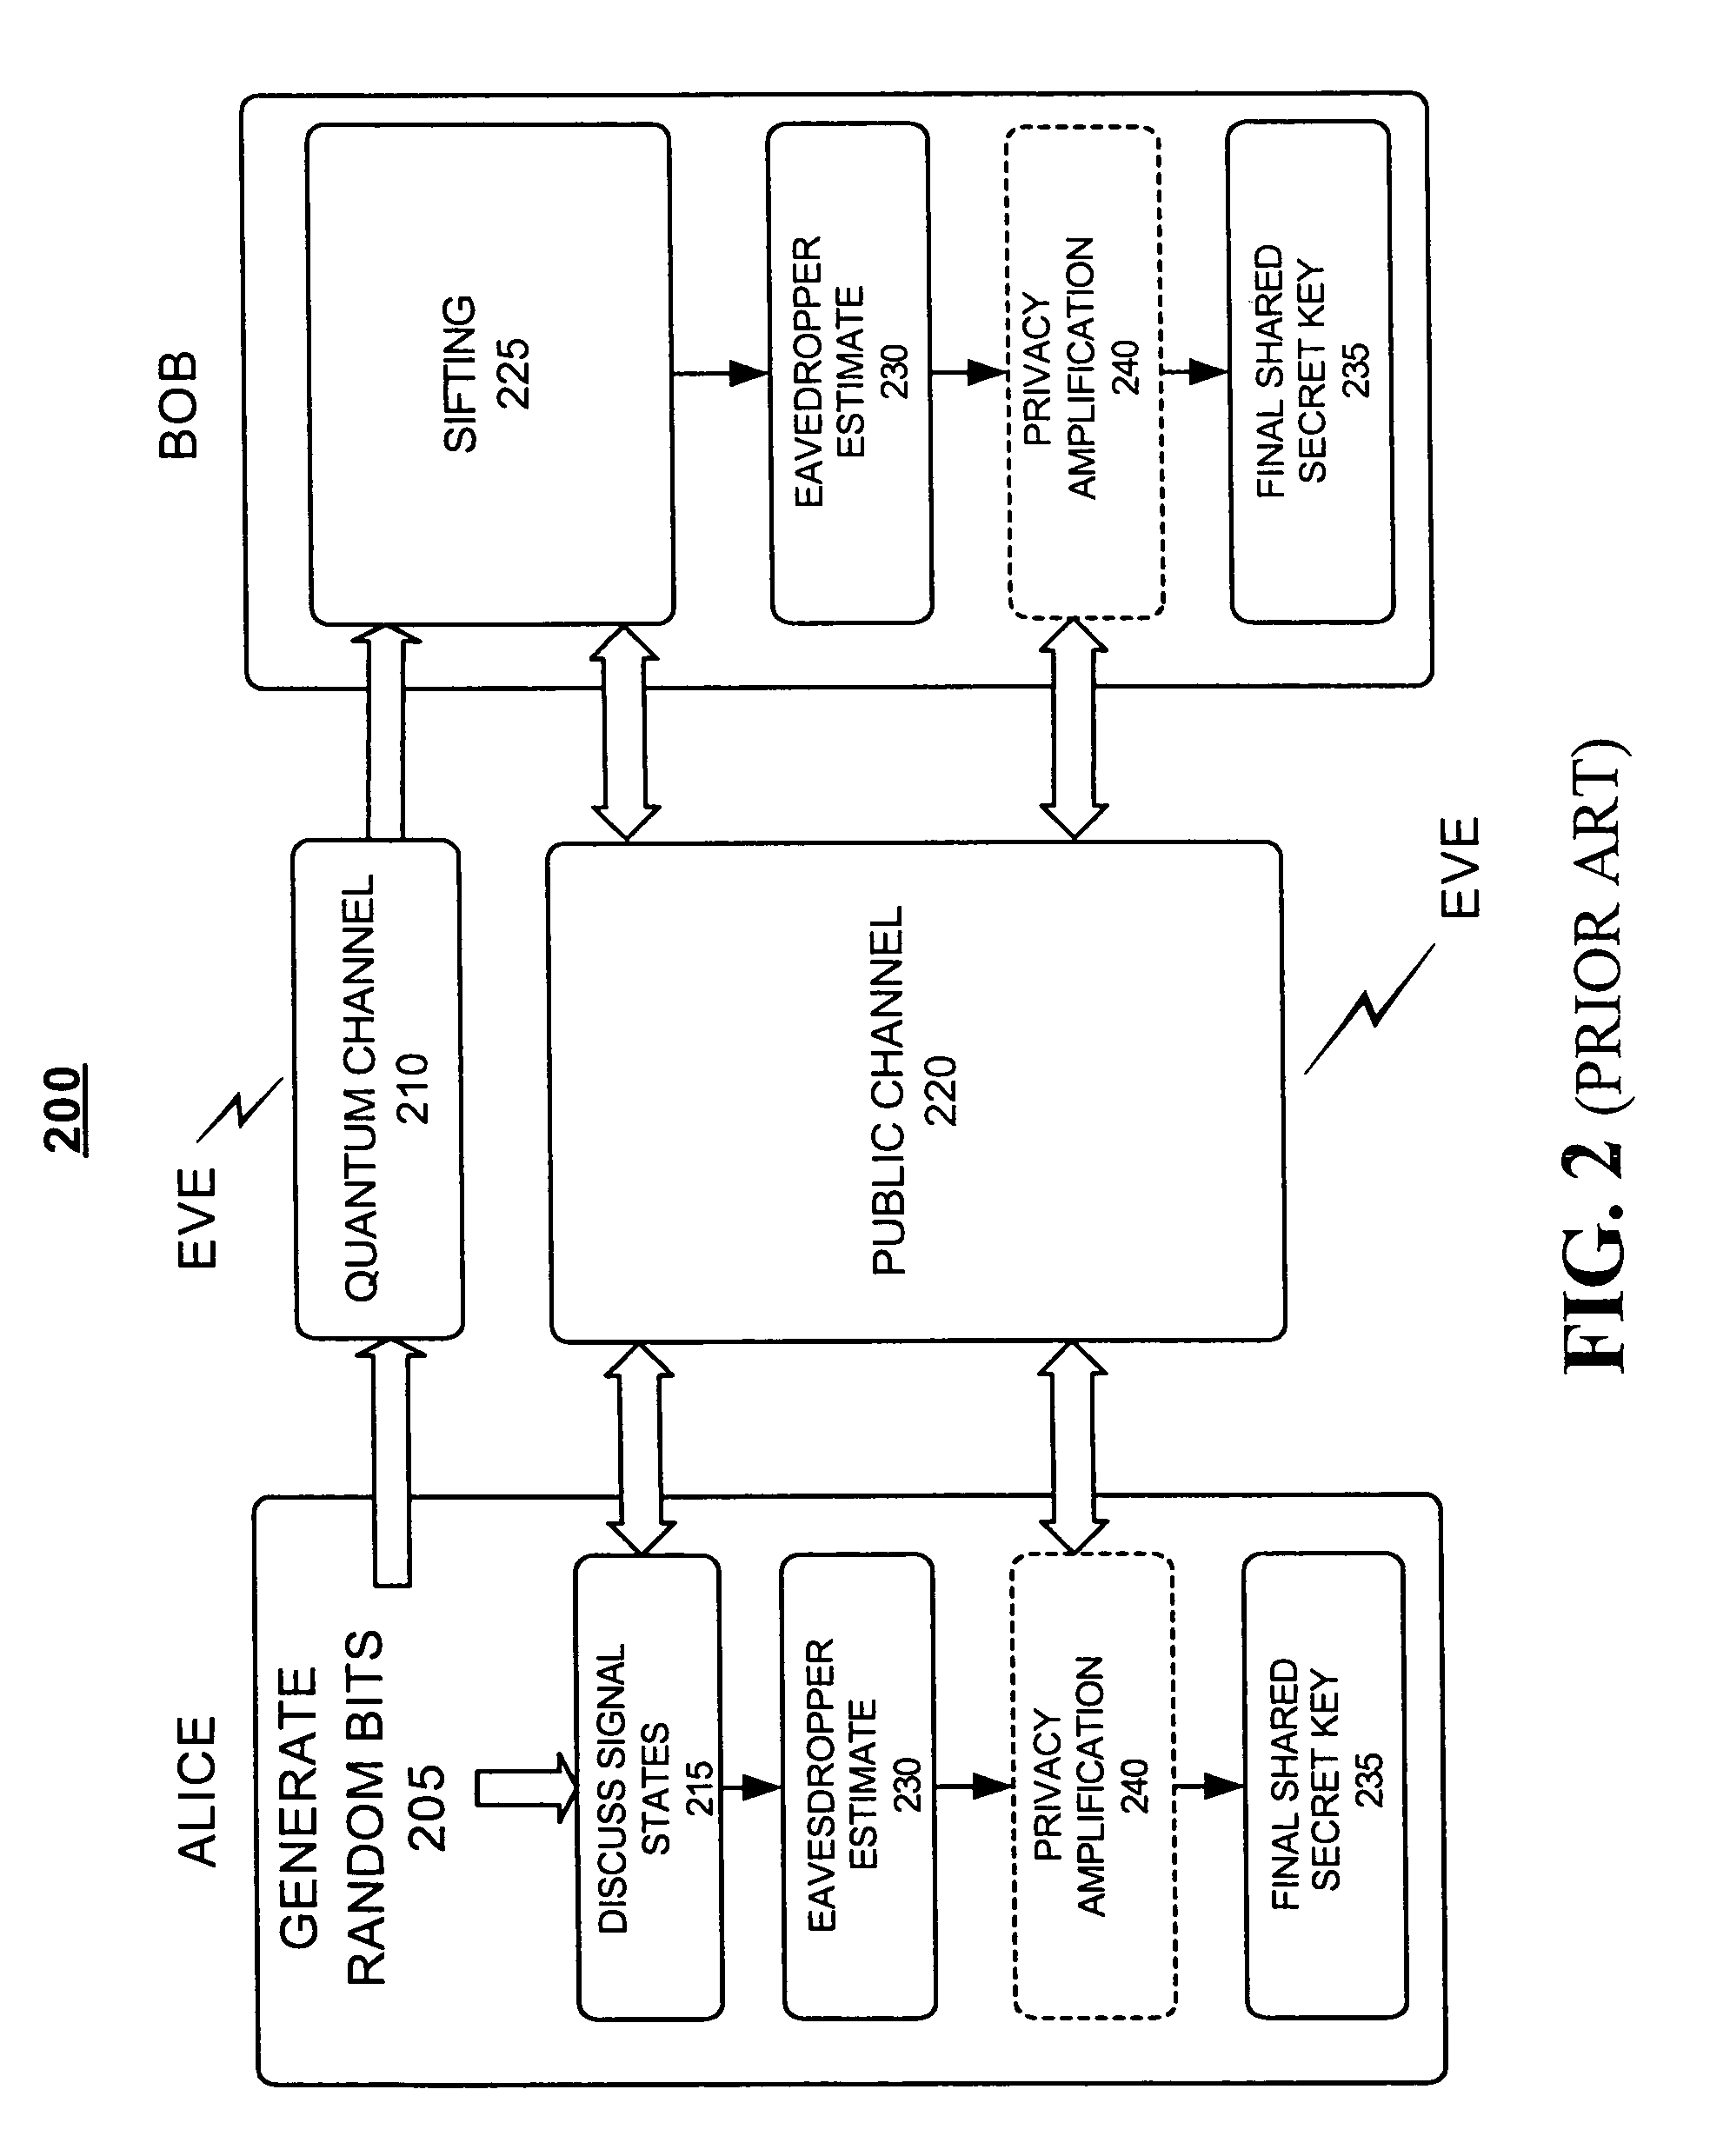 Systems and methods for implementing path length control for quantum cryptographic systems